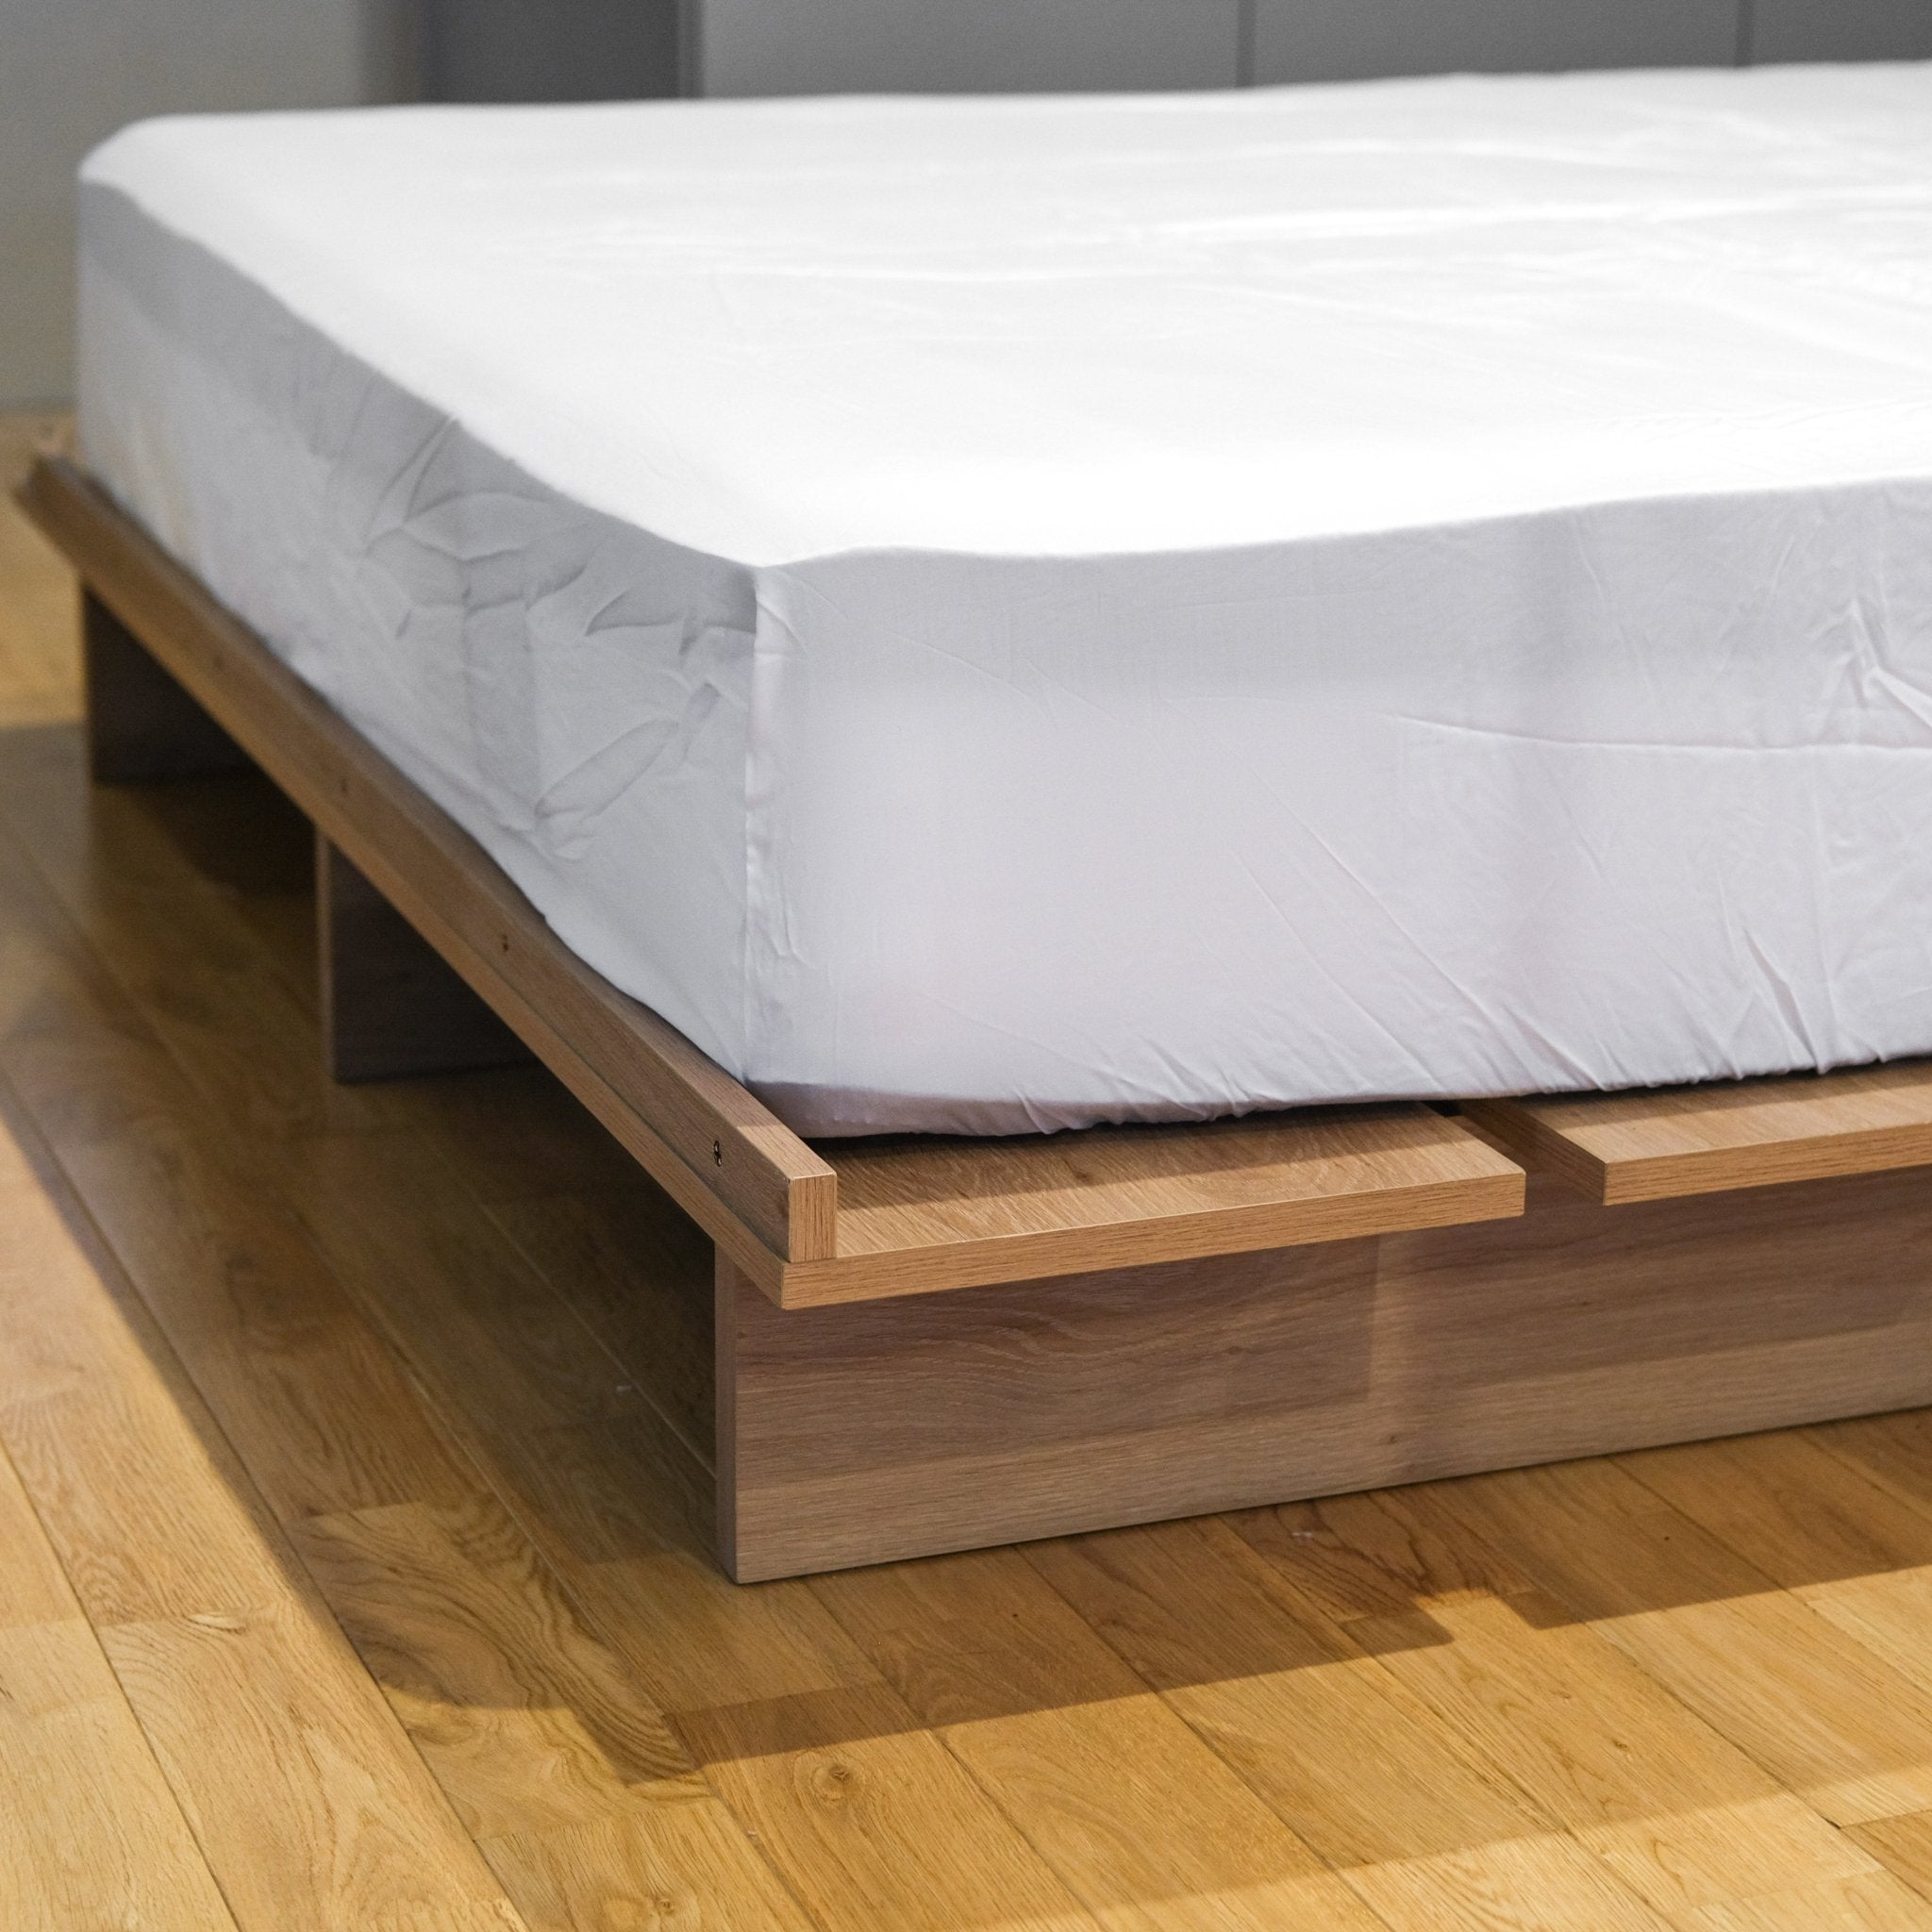 Bamboo Fitted Box Sheets - aucentic